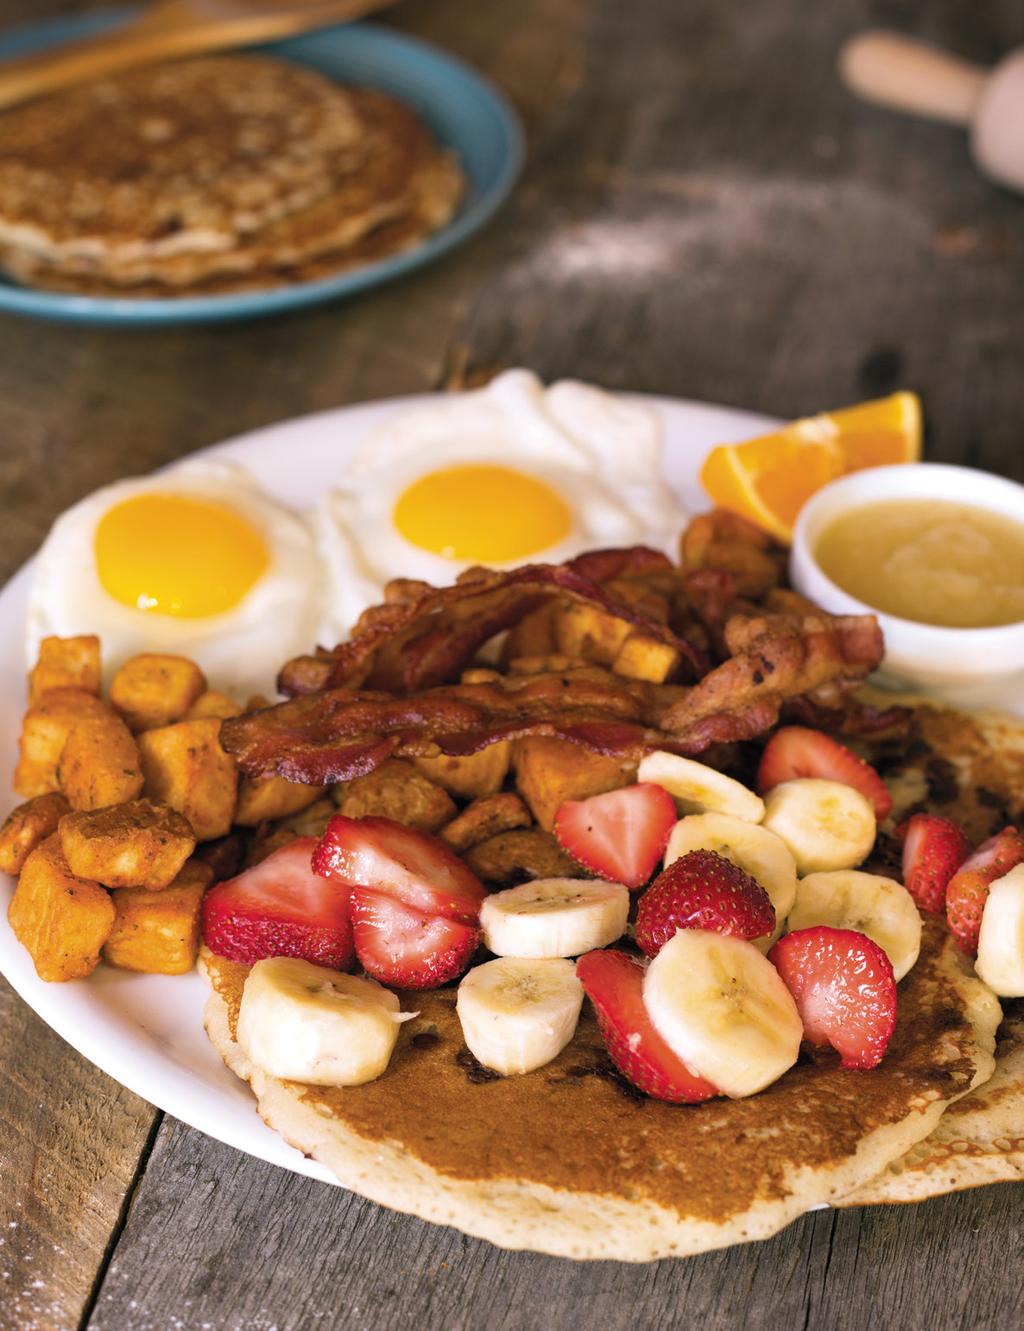 NEW ITEM DOUBLE BLACK JACK 2 Eggs and bacon served with two chocolate chip pancakes topped with bananas